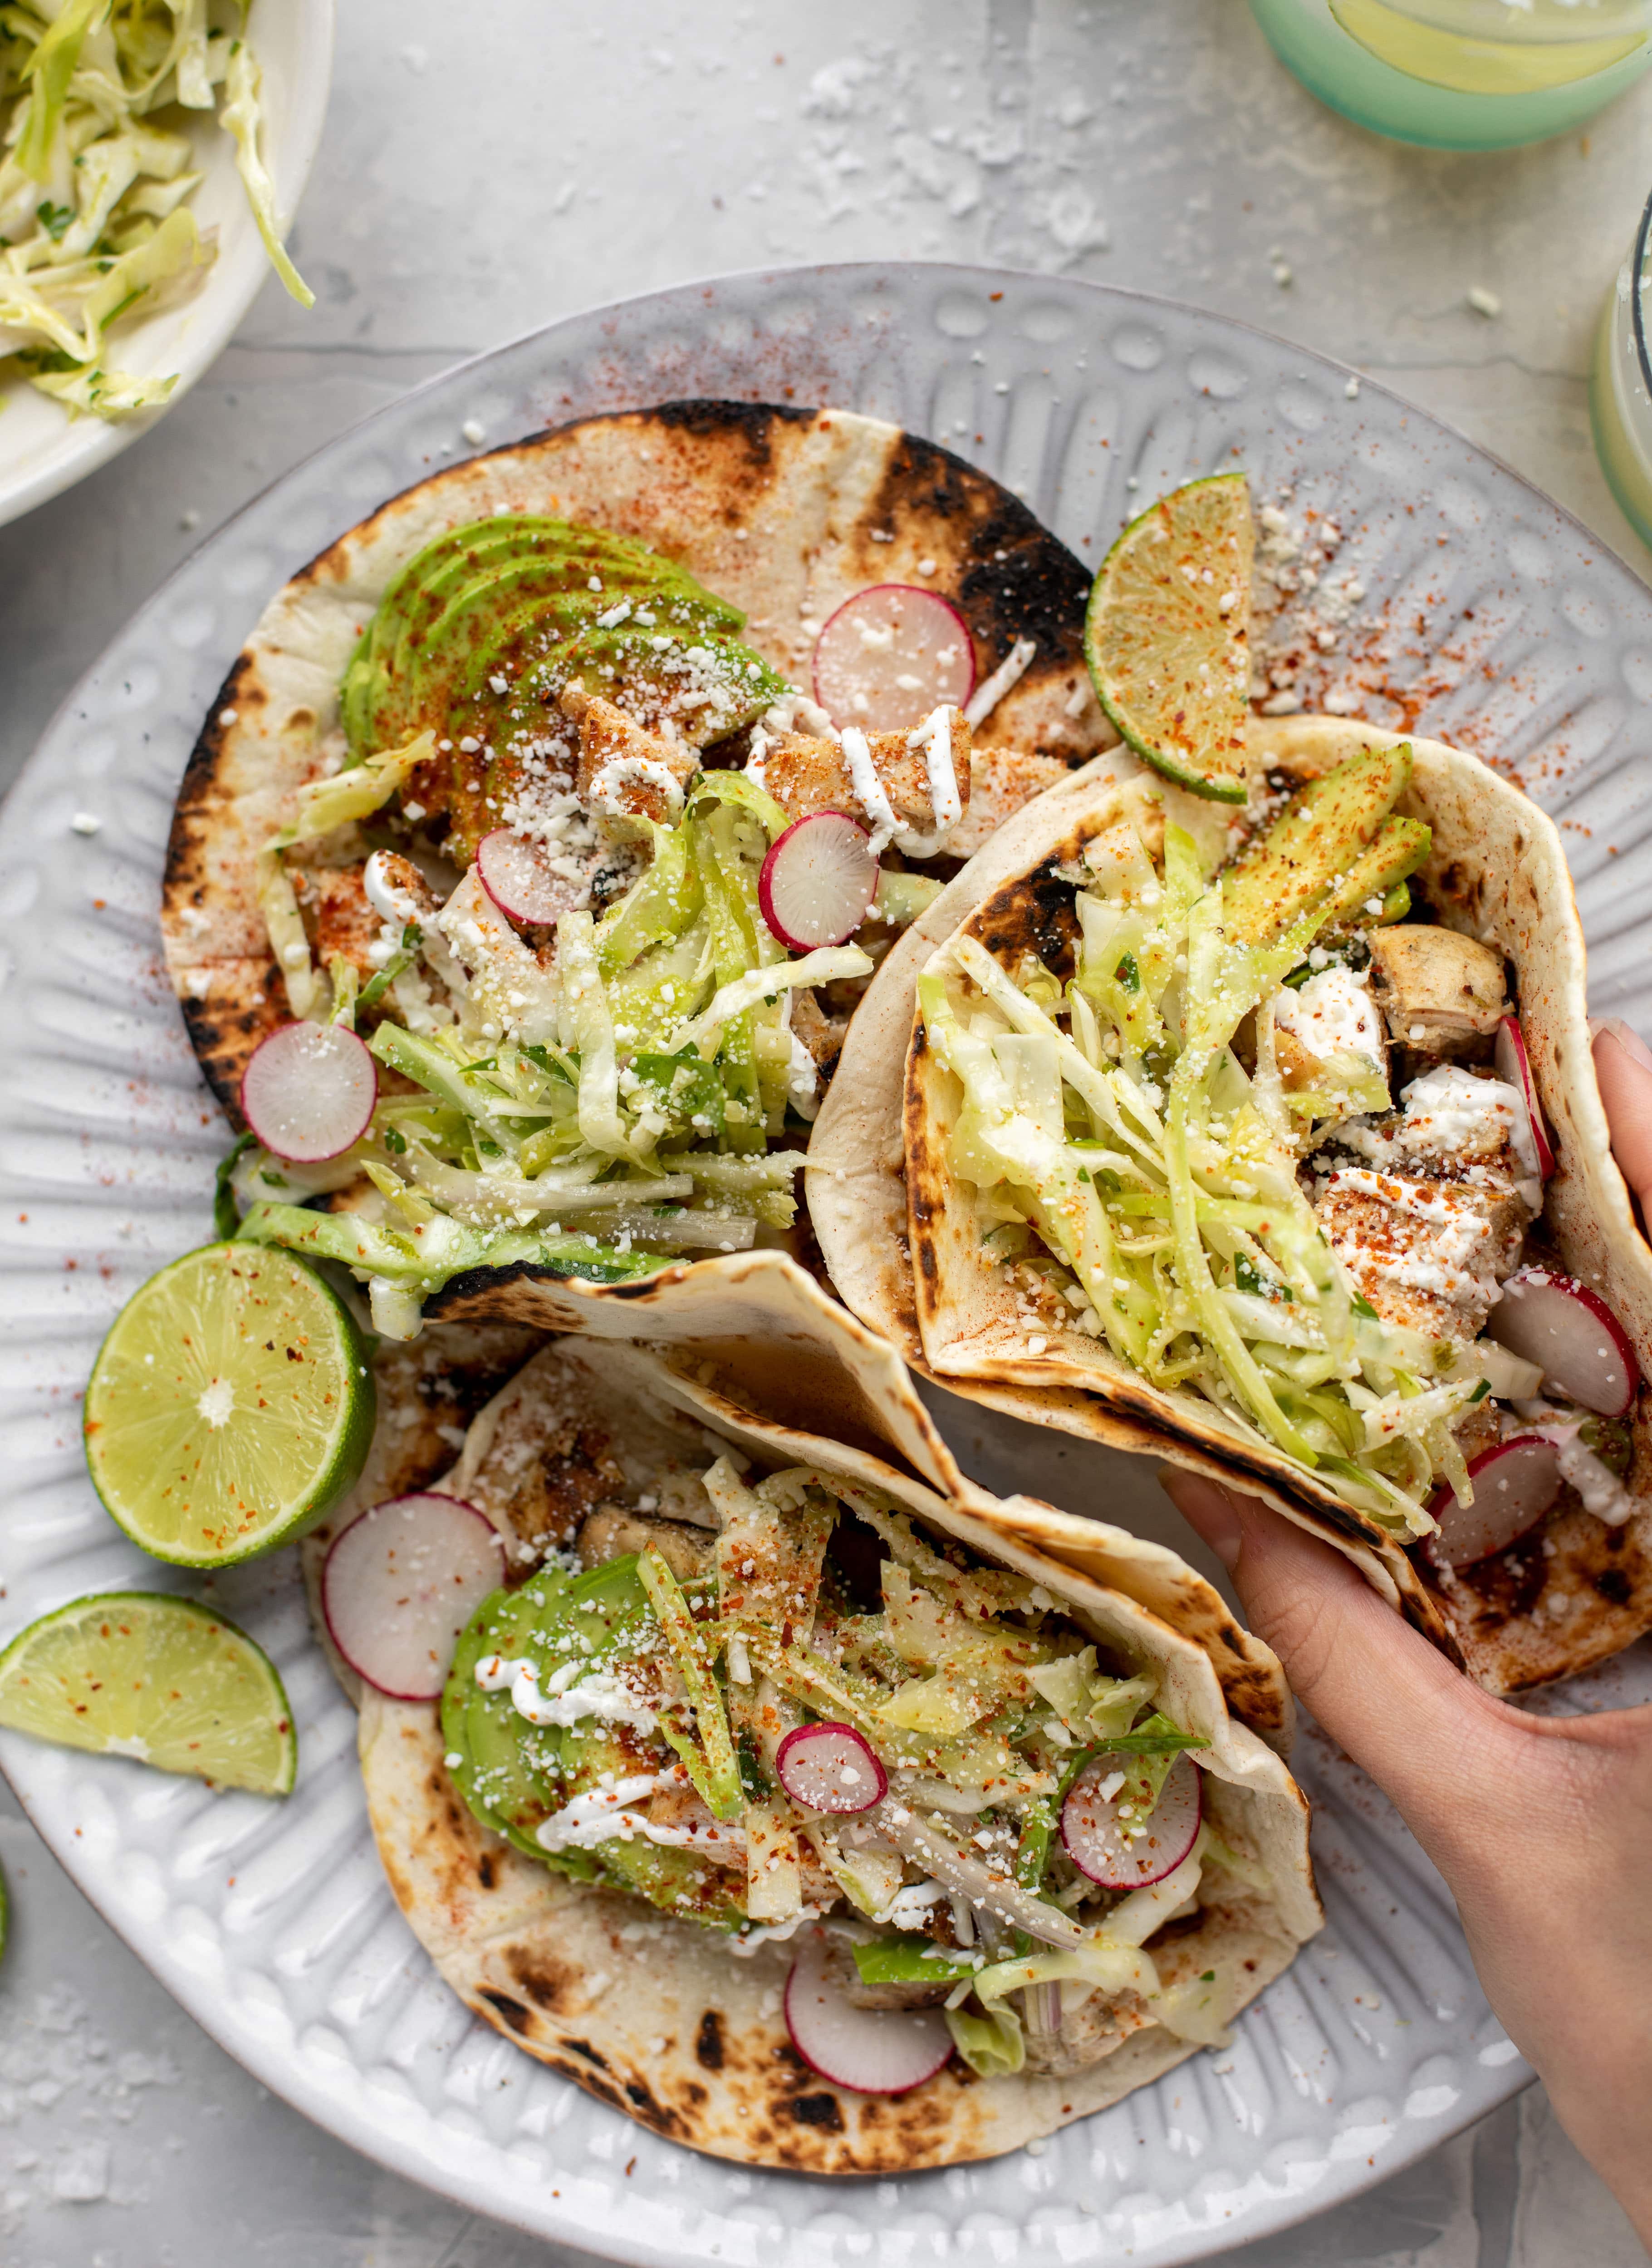 These grilled chicken tacos are easy and flavorful. They are super smoky, then topped with a key lime slaw that is absolutely delicious!